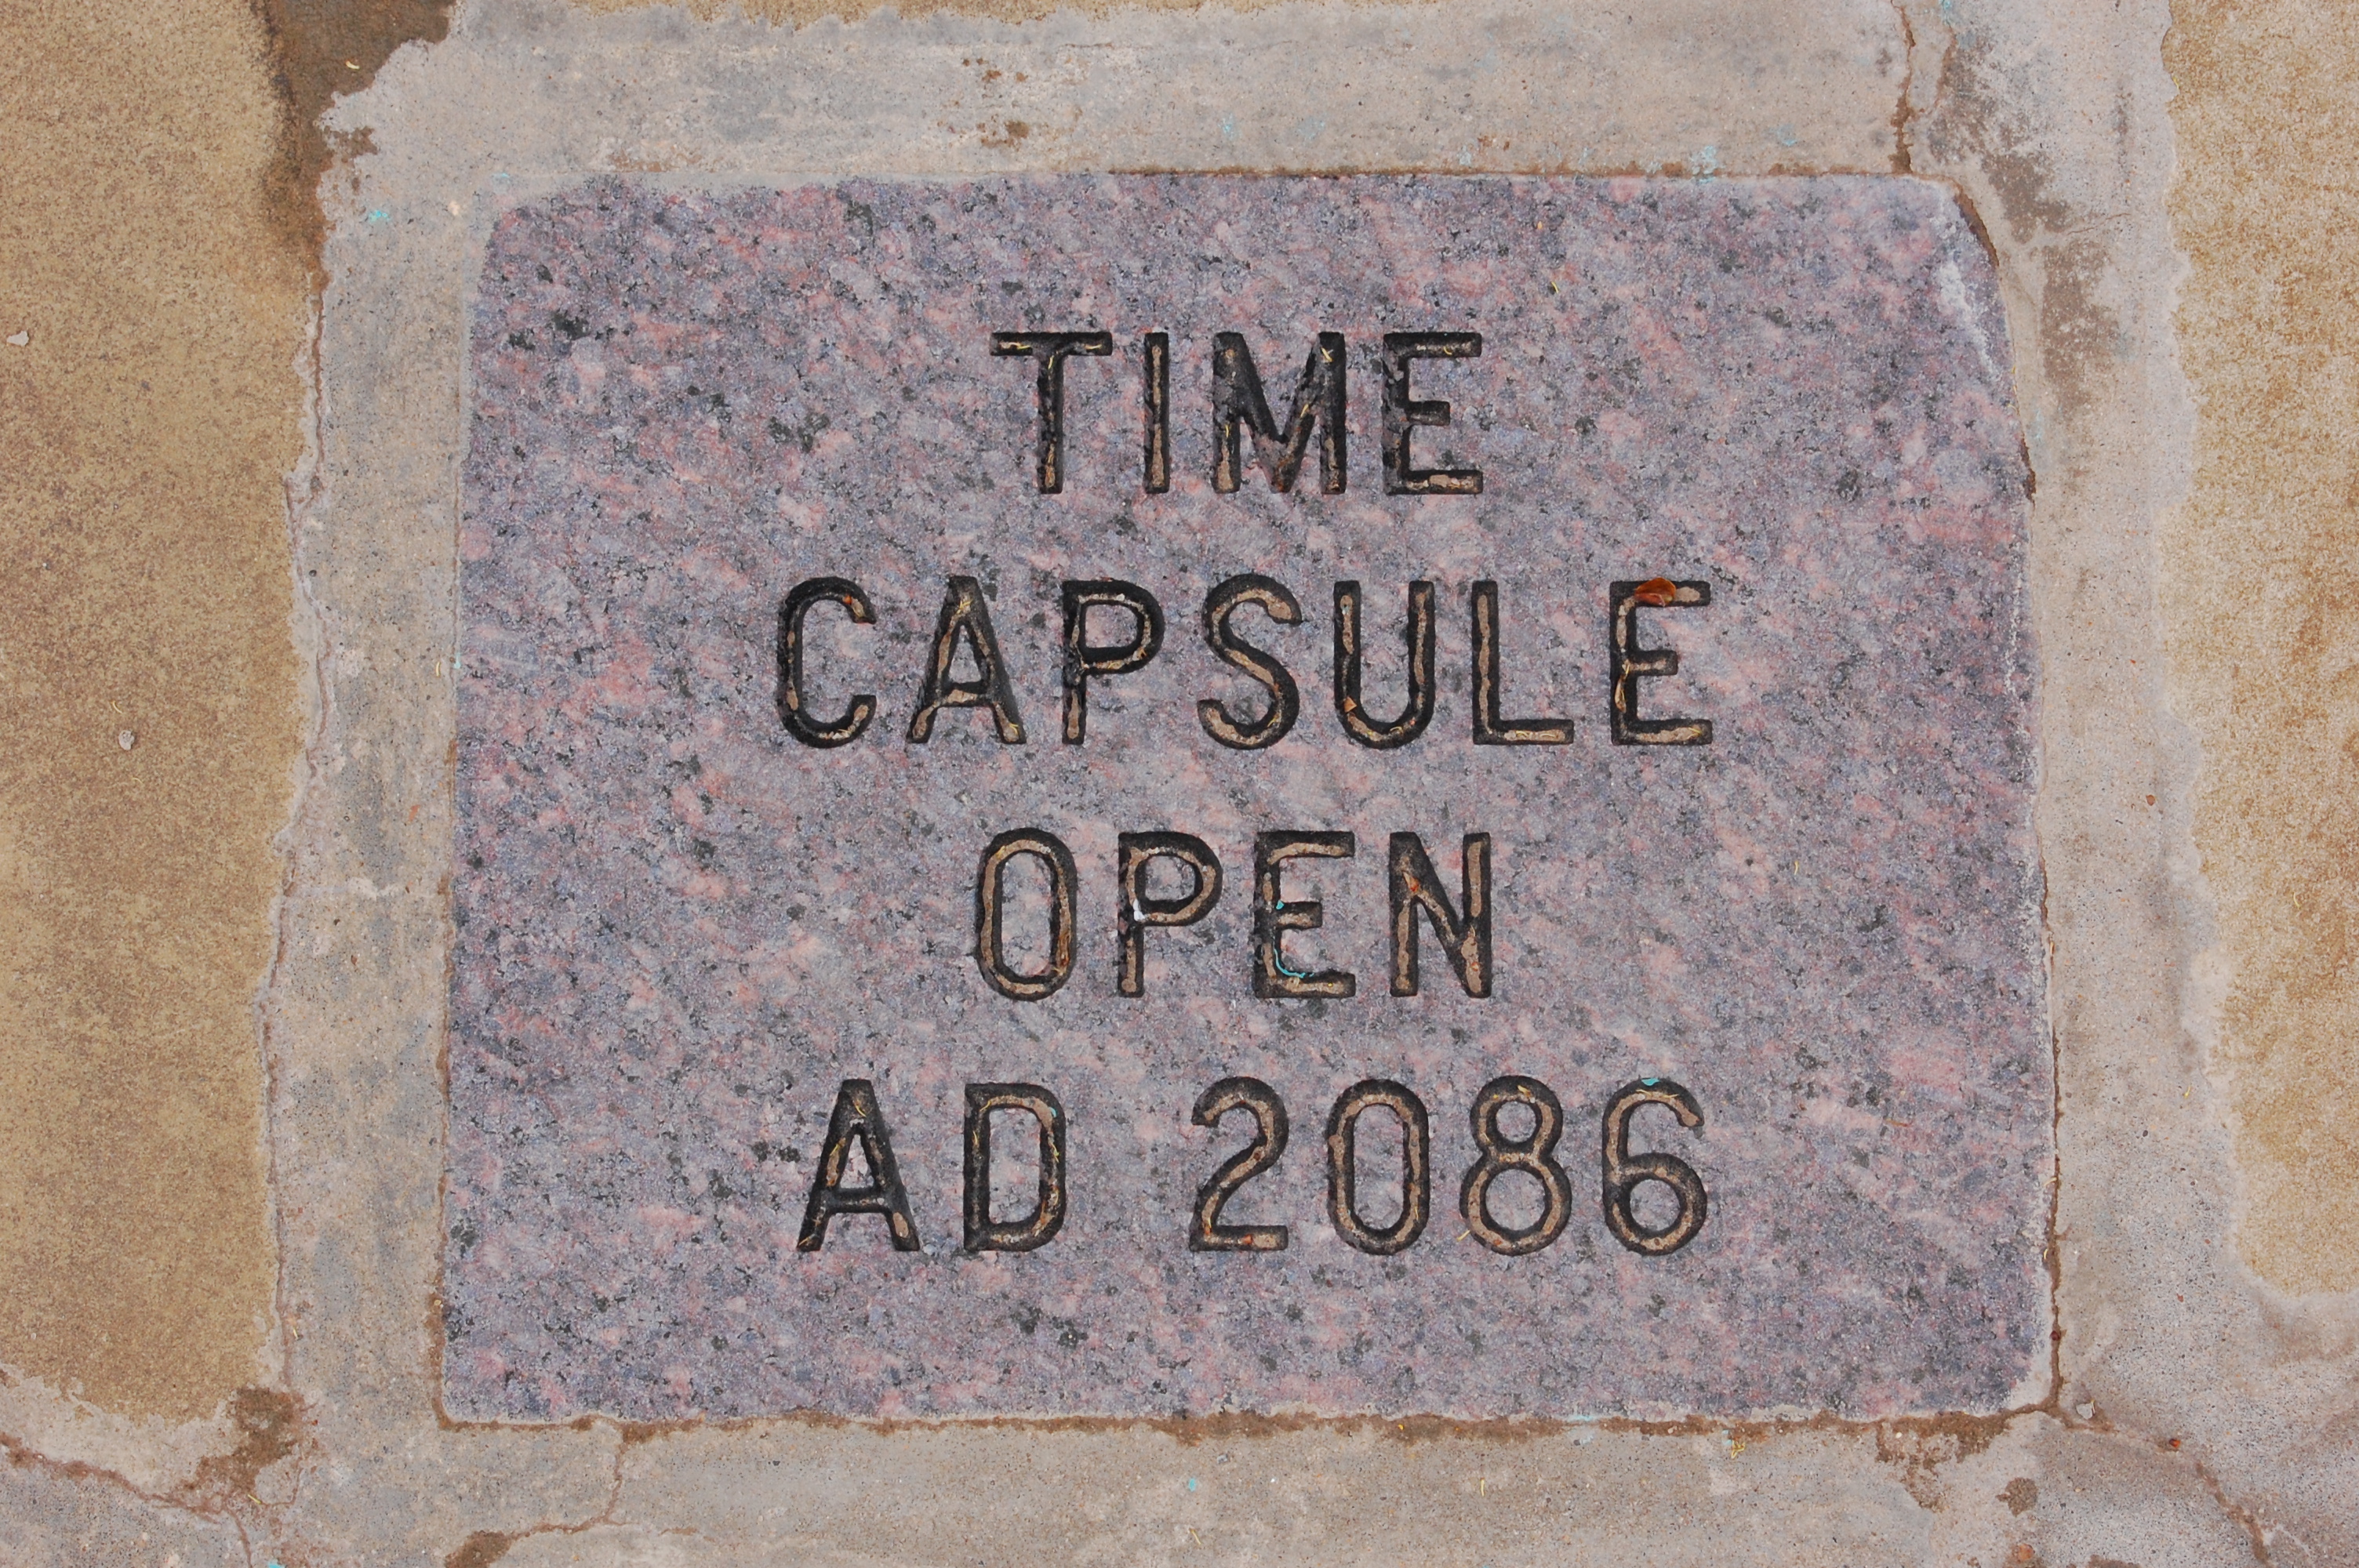 A plaque that reads: TIME CAPSULE OPEN AD 2086